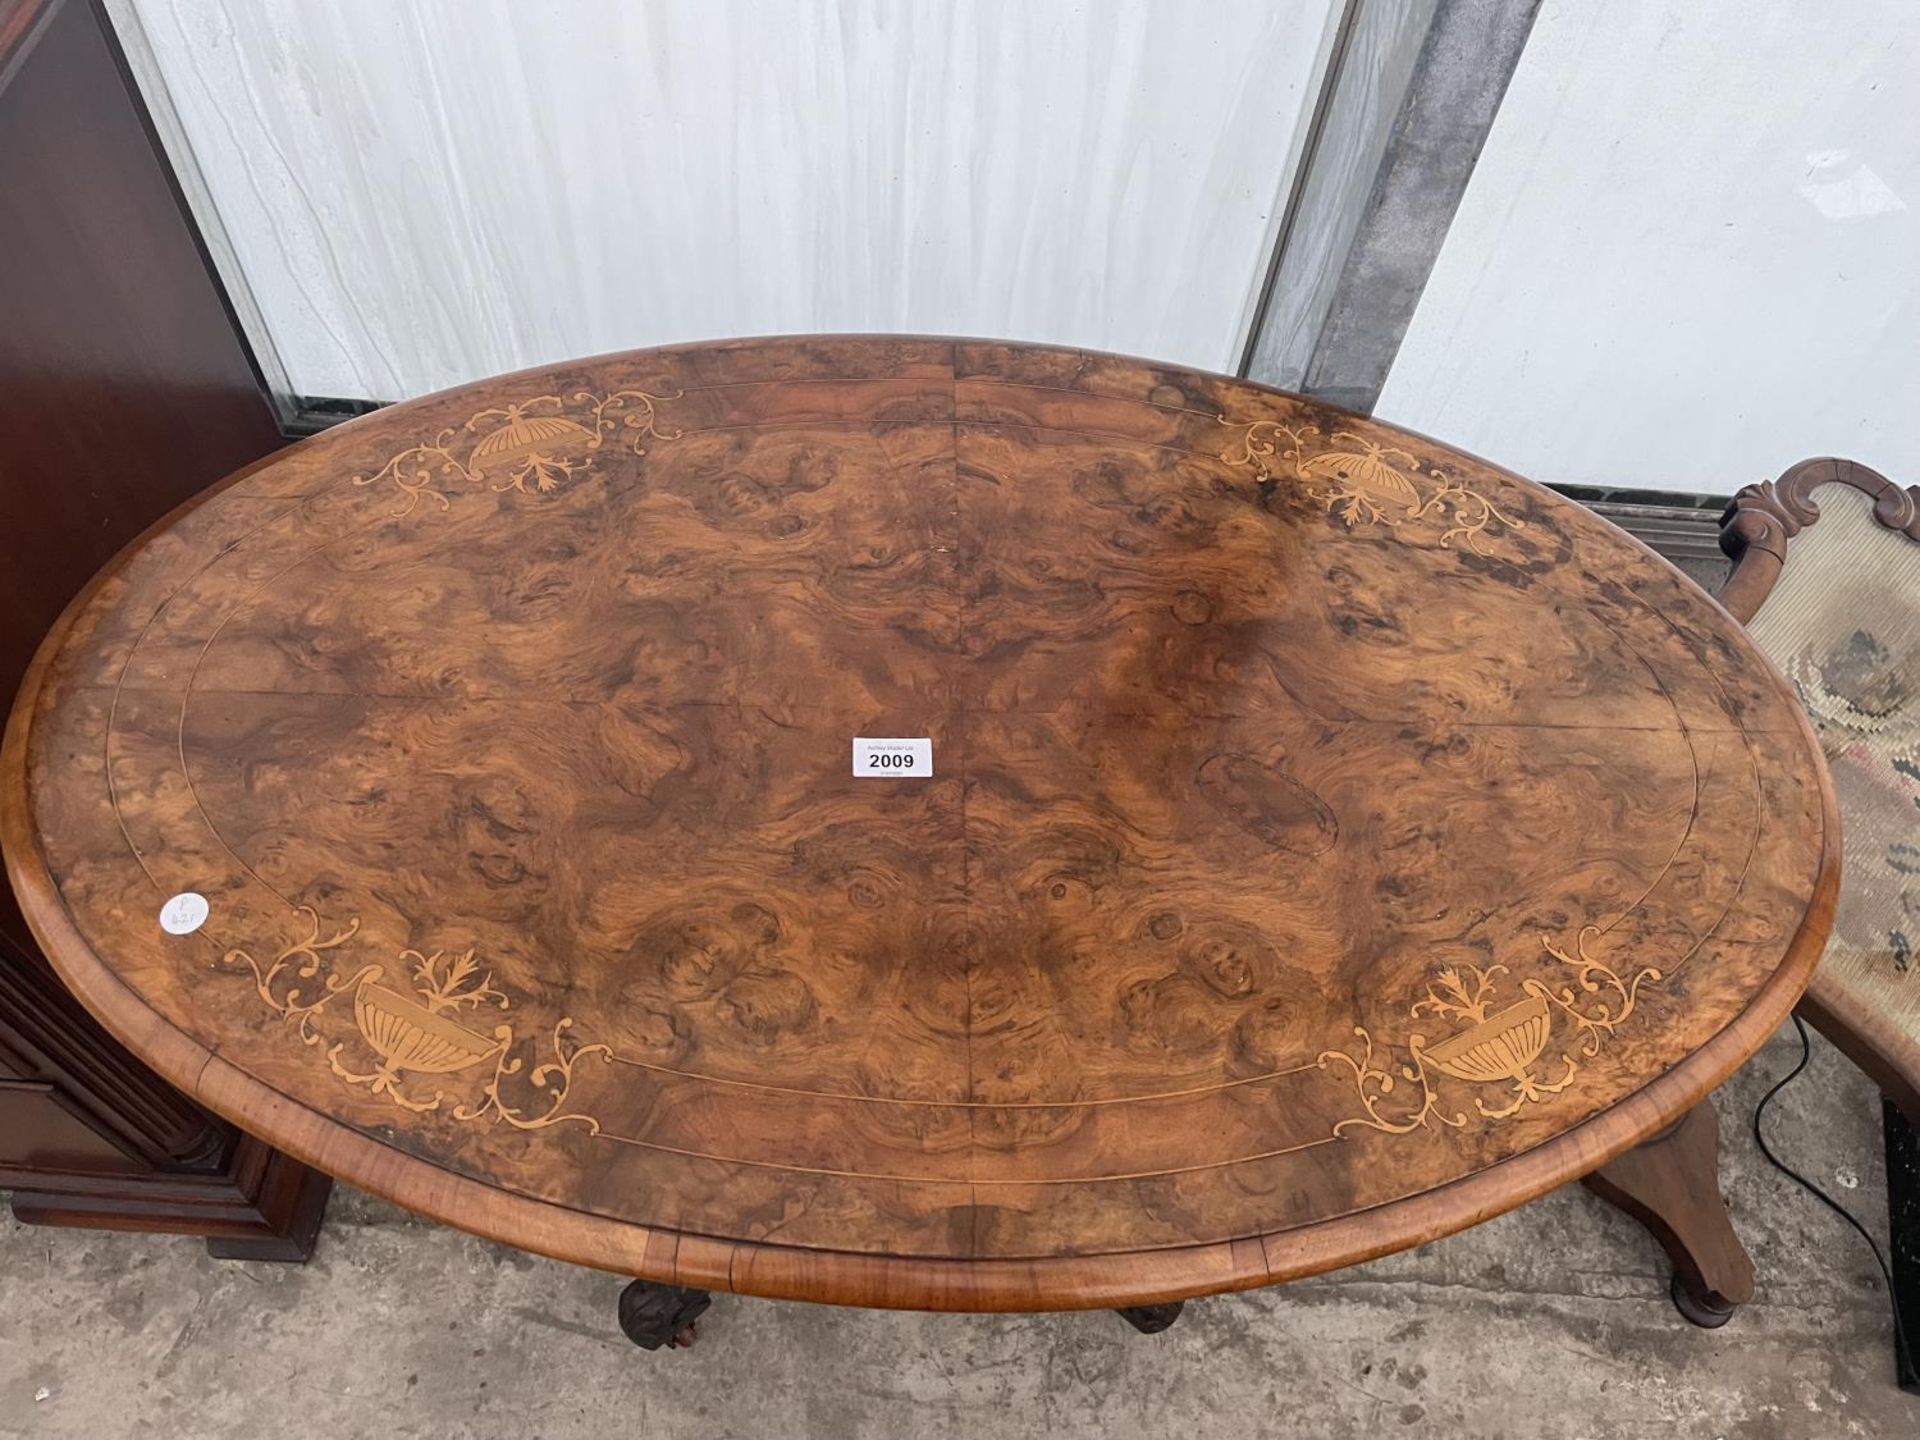 A VICTORIAN OVAL WALNUT AND INLAID LOO TABLE, 36X22" ON QUATREFOIL BASE - Image 2 of 5